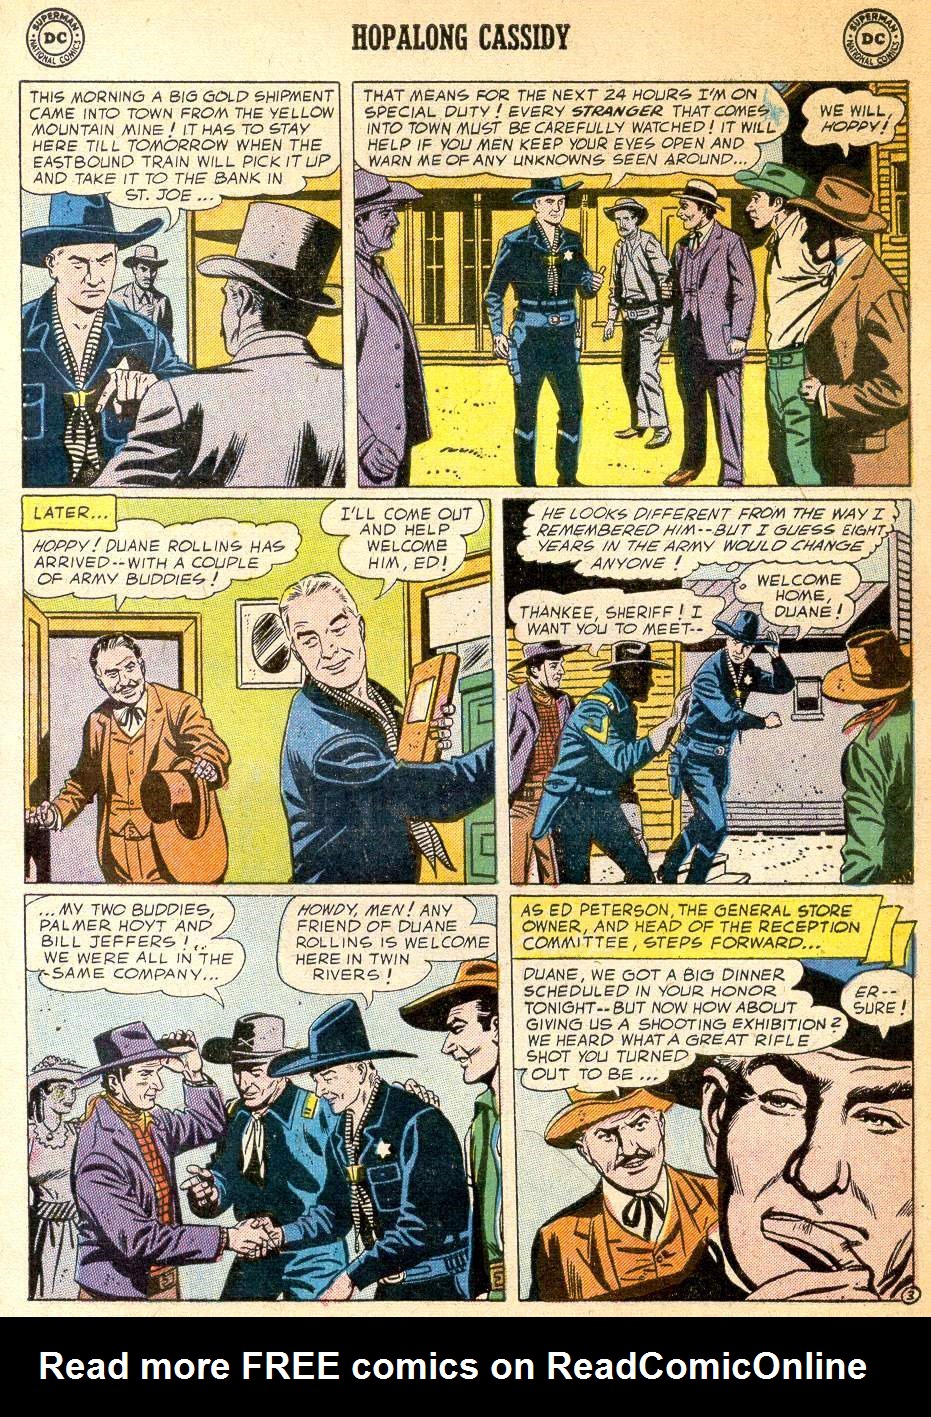 Read online Hopalong Cassidy comic -  Issue #118 - 5